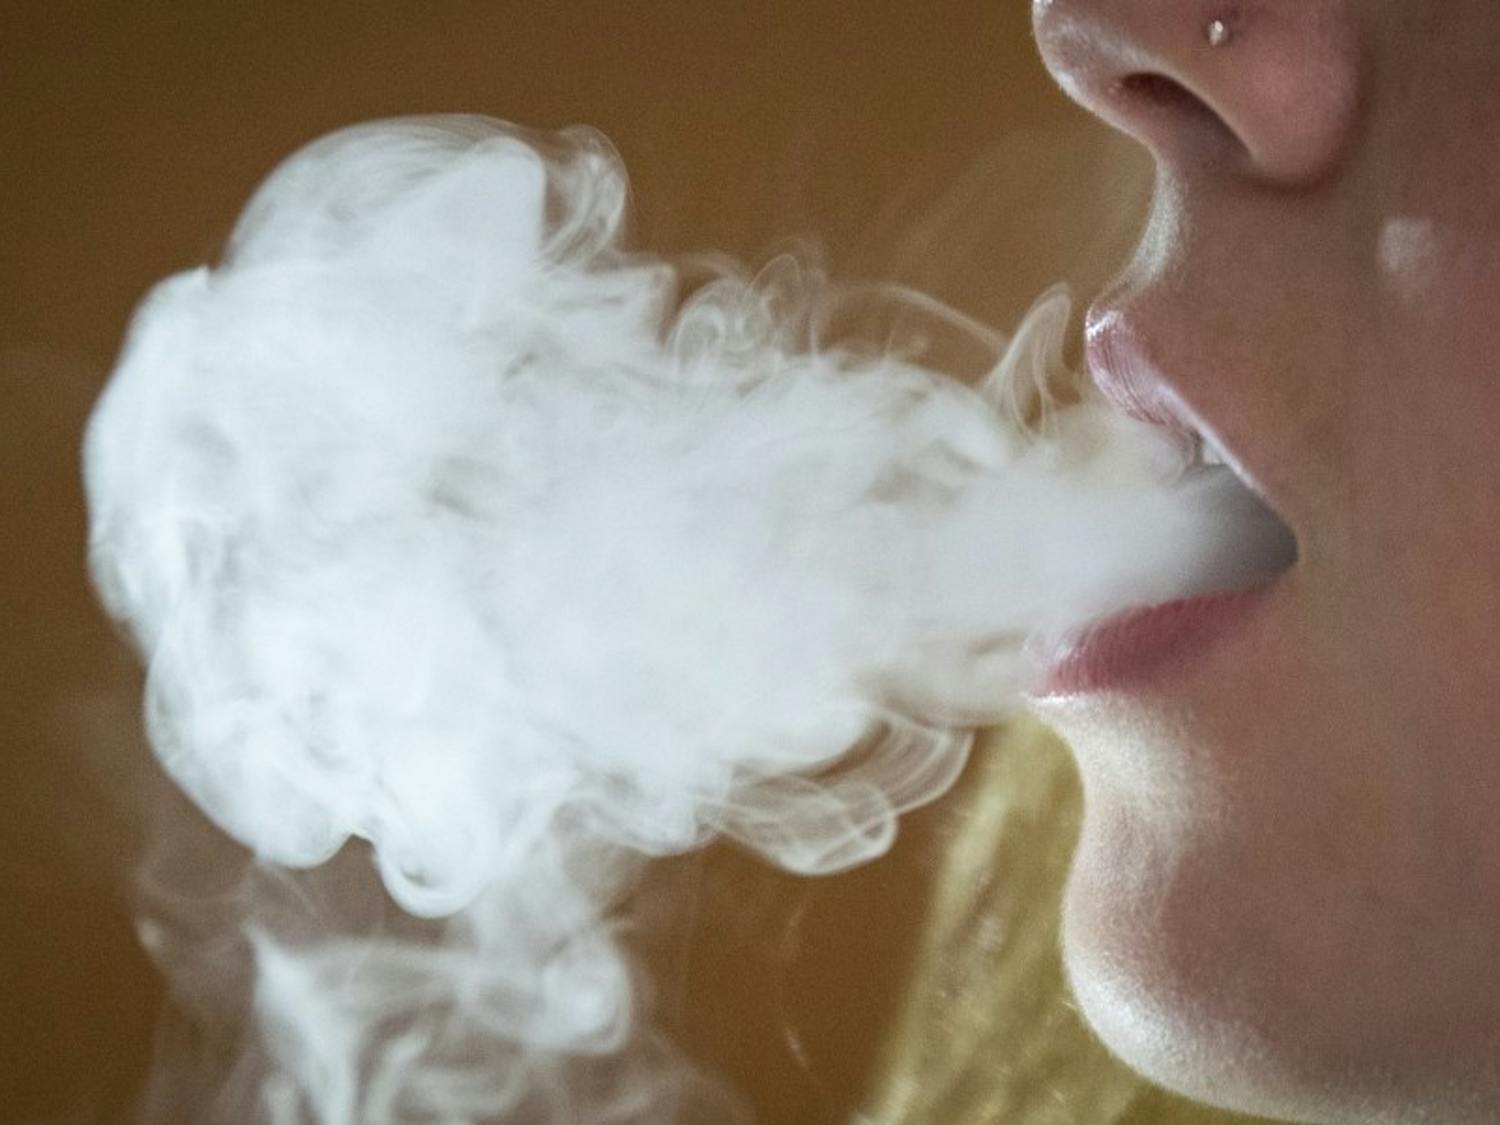 A recent survey administered to Dane County education professionals showed they are largely in support of more regulations against e-cigarette use.